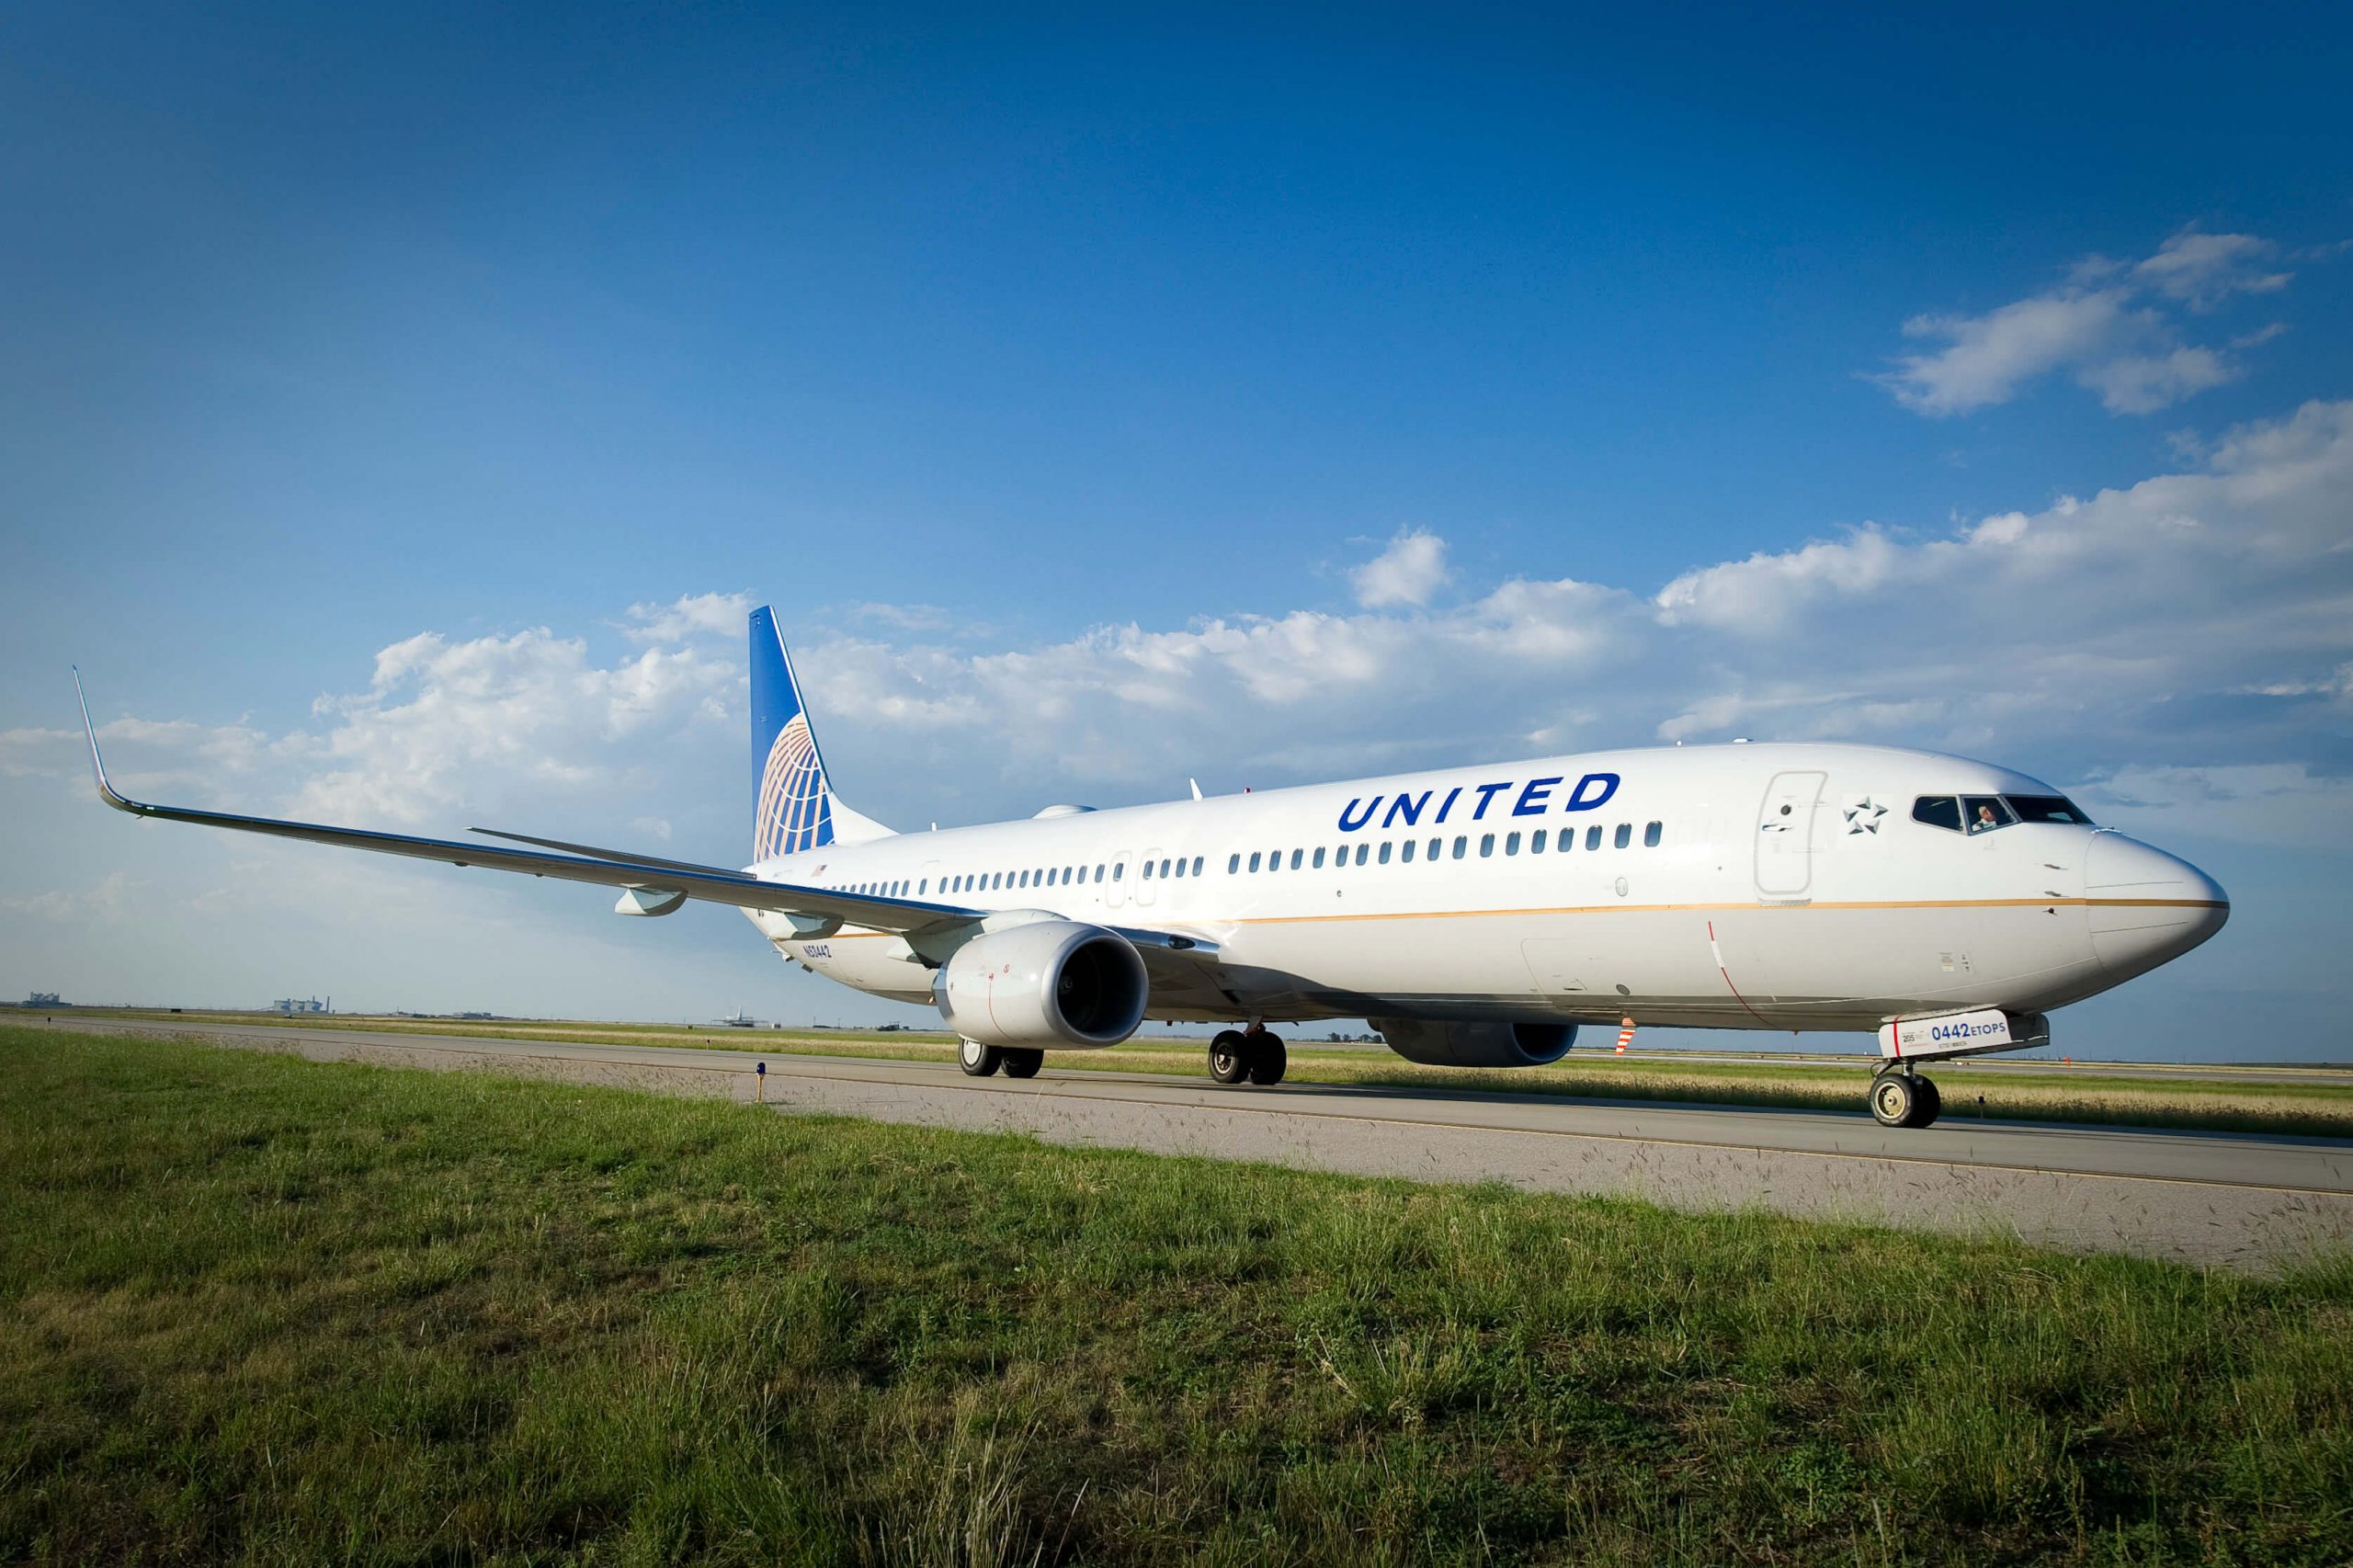 United Airlines introduces second flight from San Francisco to Hong Kong